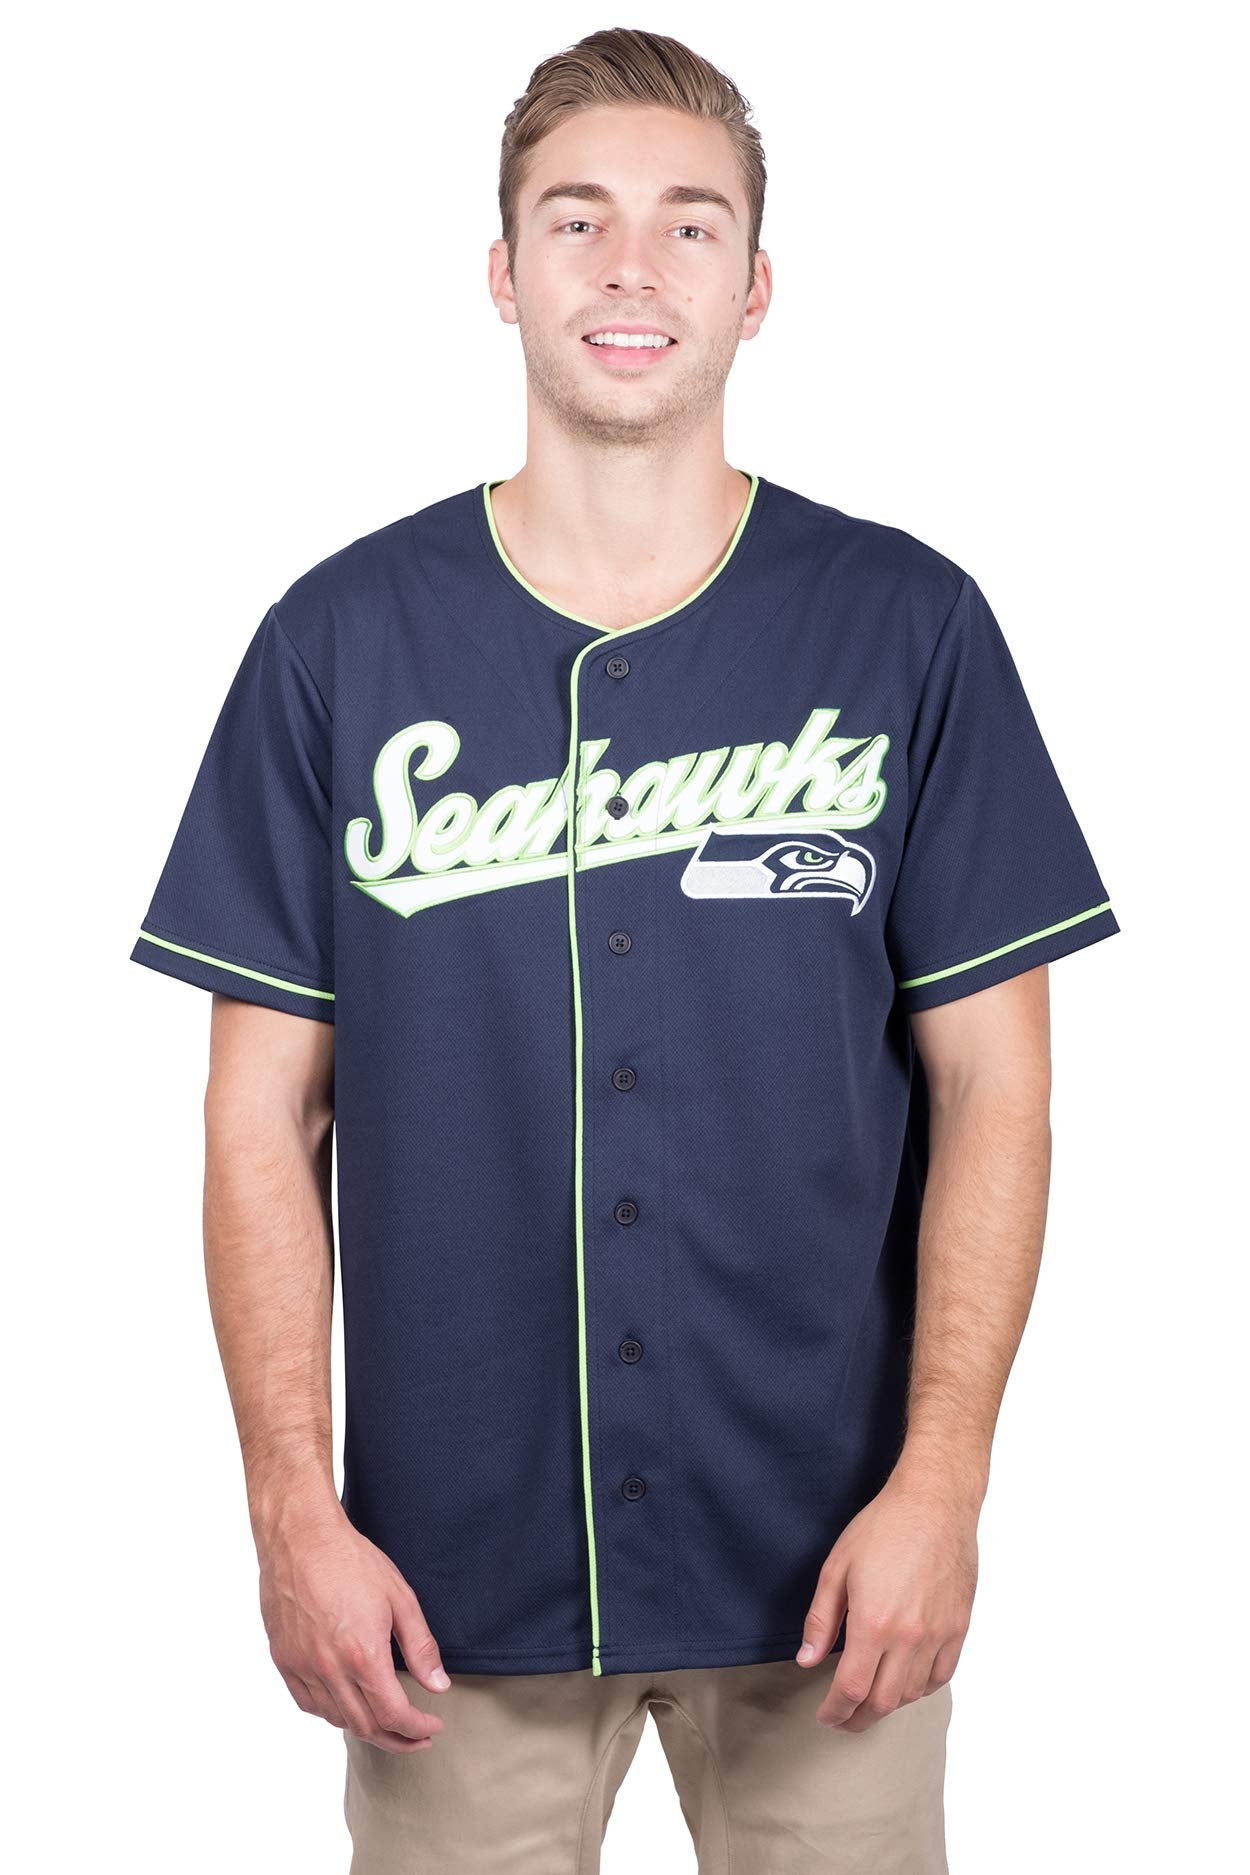 Ultra Game NFL Seattle Seahawks Mens Game Day Button Down Baseball Mesh Jersey Shirt|Seattle Seahawks